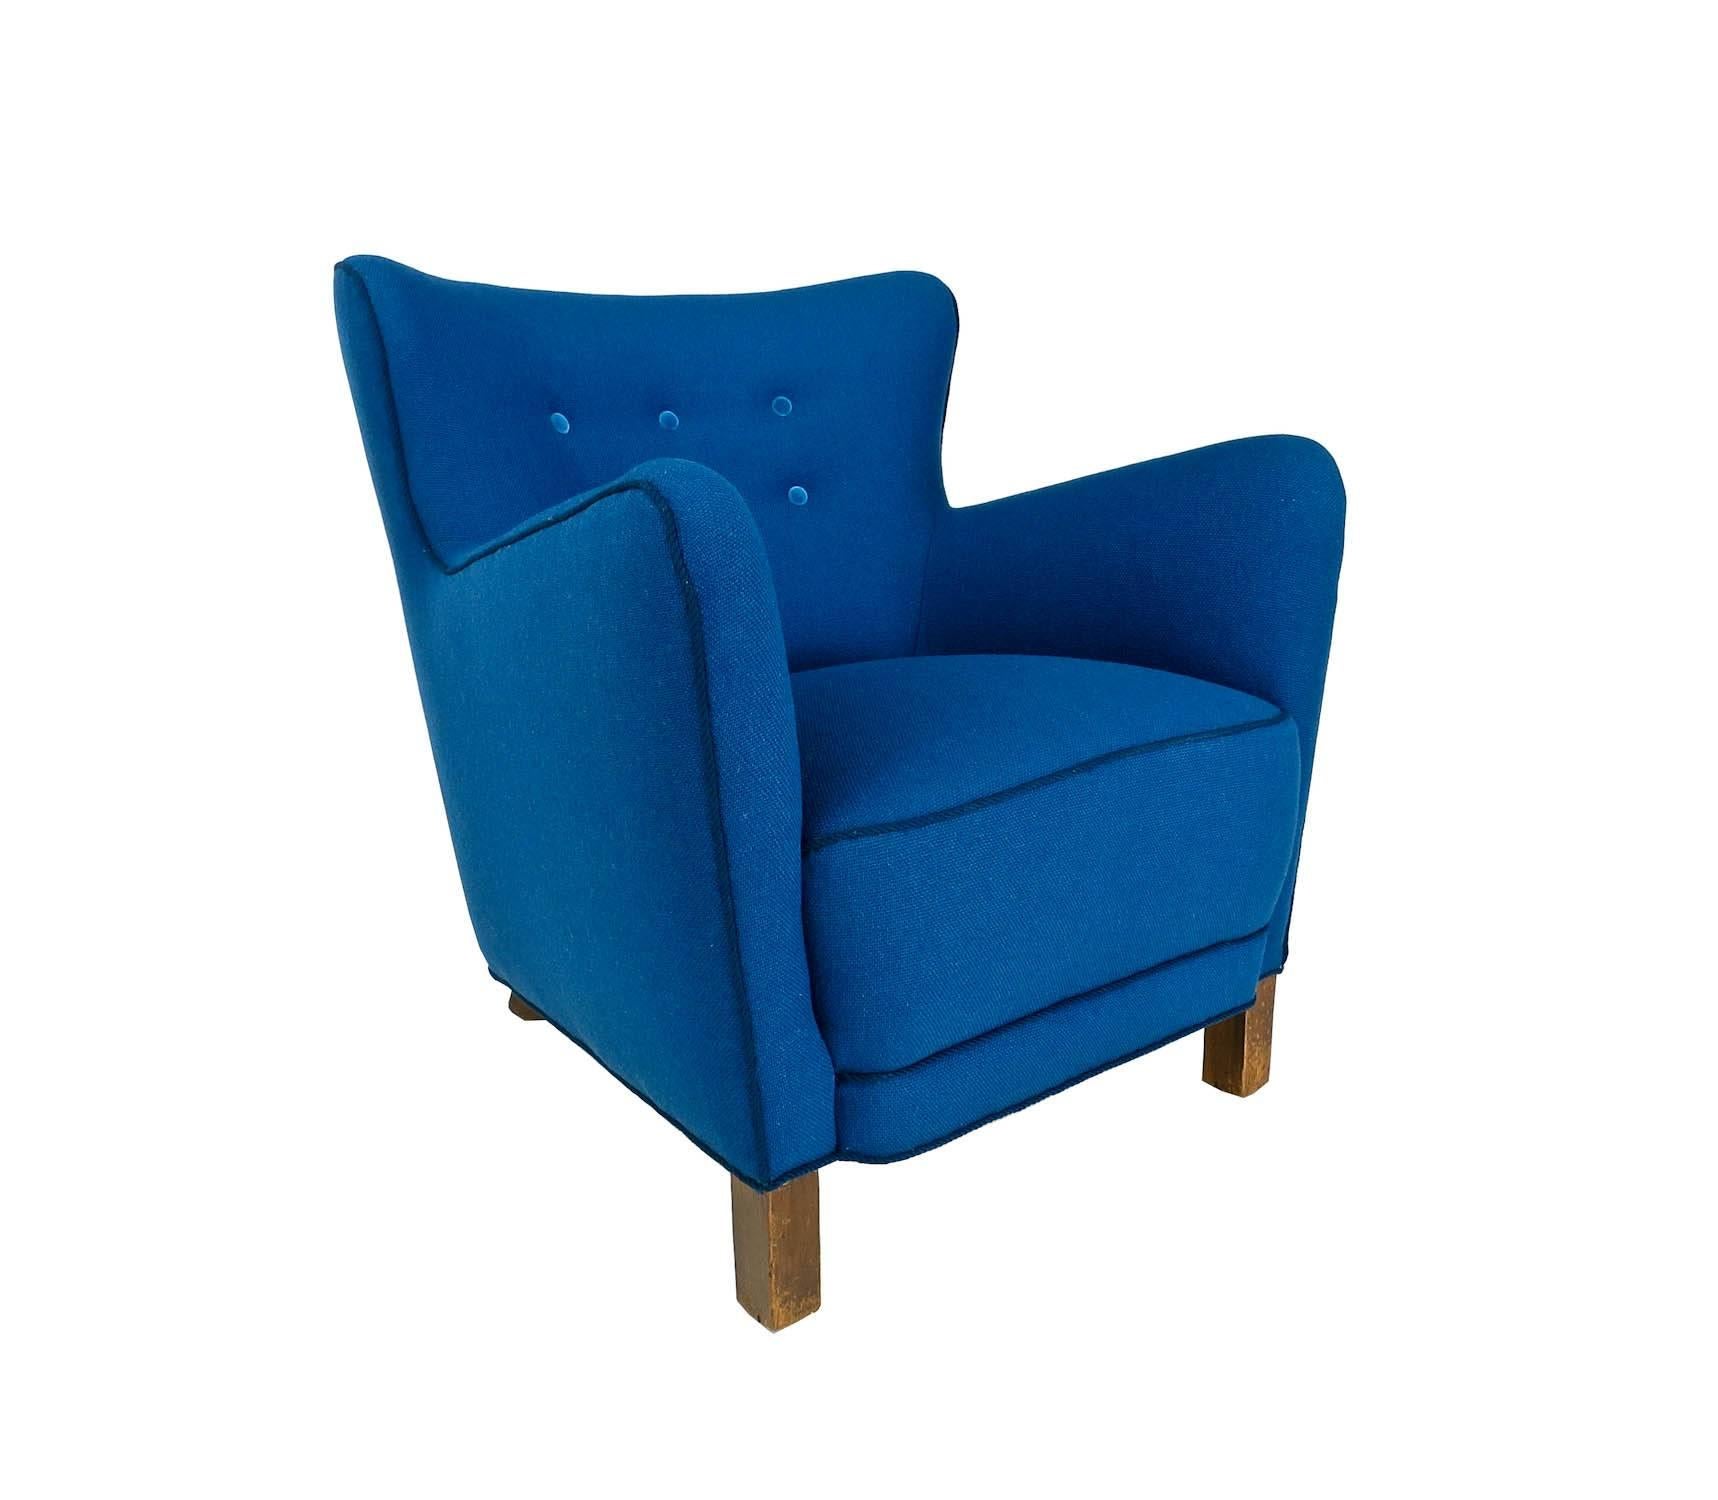 A beautiful Fritz Hansen armchair from the 1940s reupholstered in a blue wool fabric with velvet buttons and rope twist trimming. A curved shaped seat back flanked by high sided armrests, resting on square beech legs, all in an excellent original